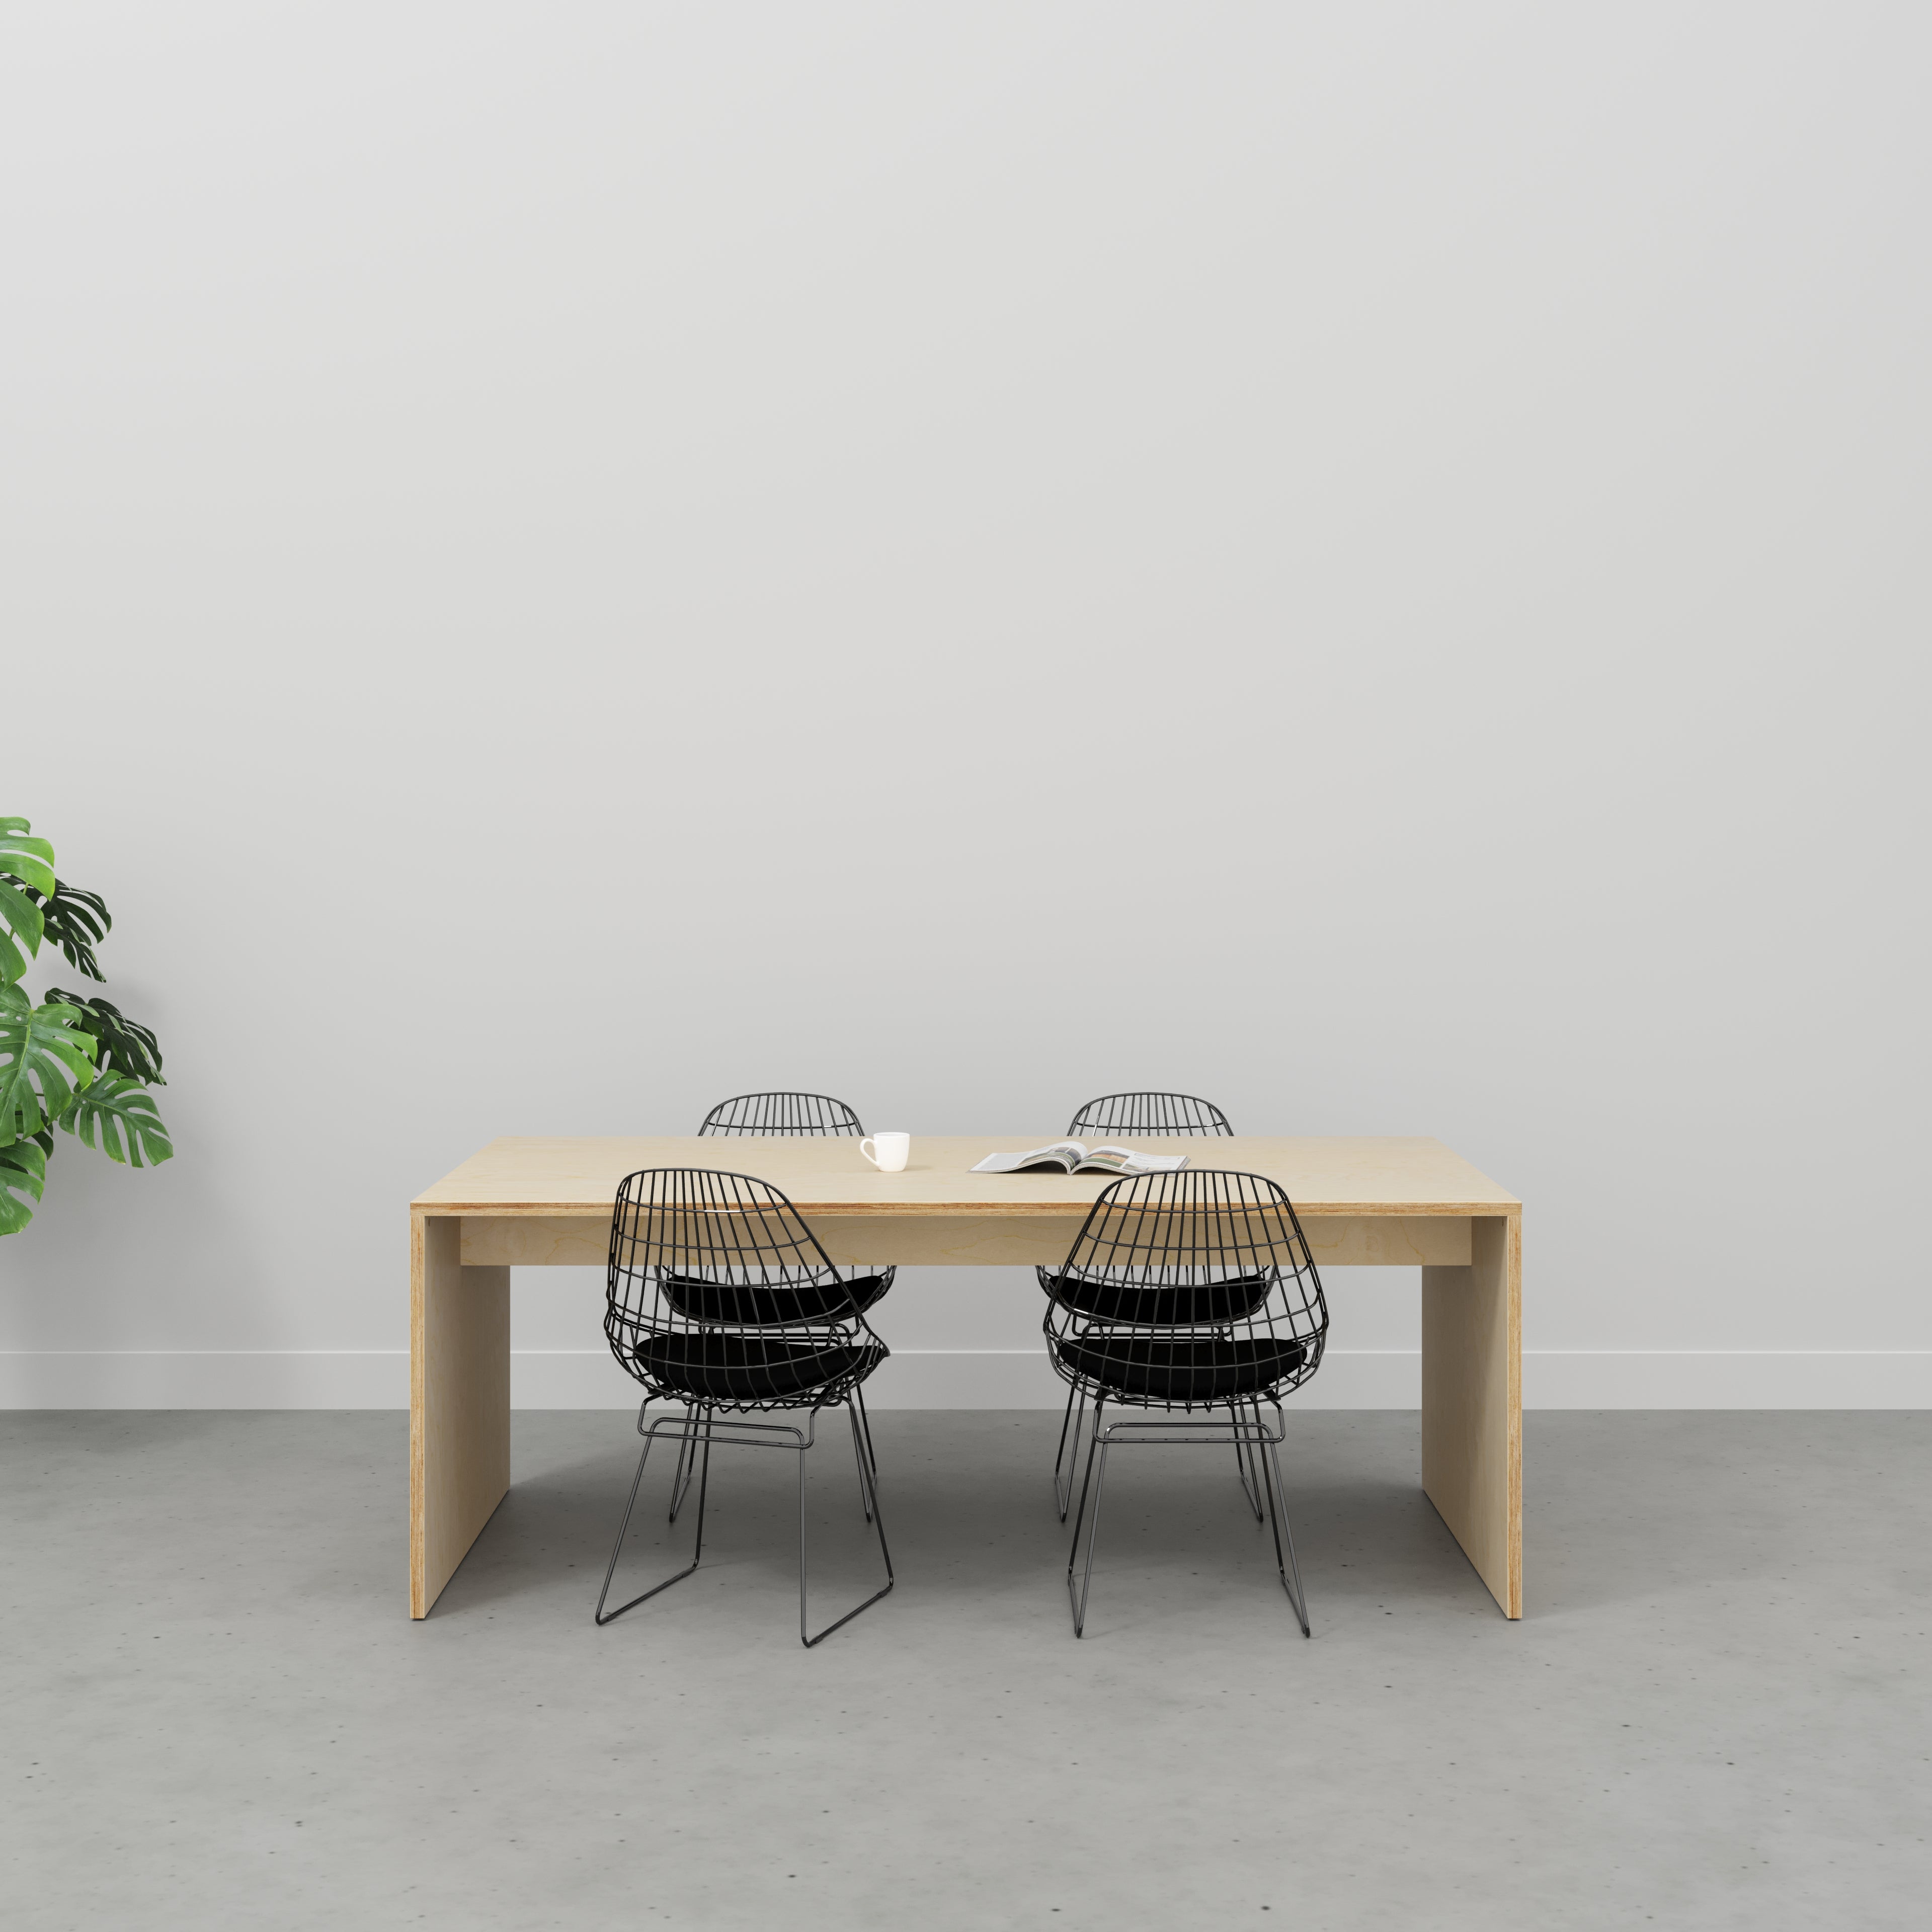 Table with Solid Sides - Plywood Birch - 2000(w) x 1000(d) x 750(h)